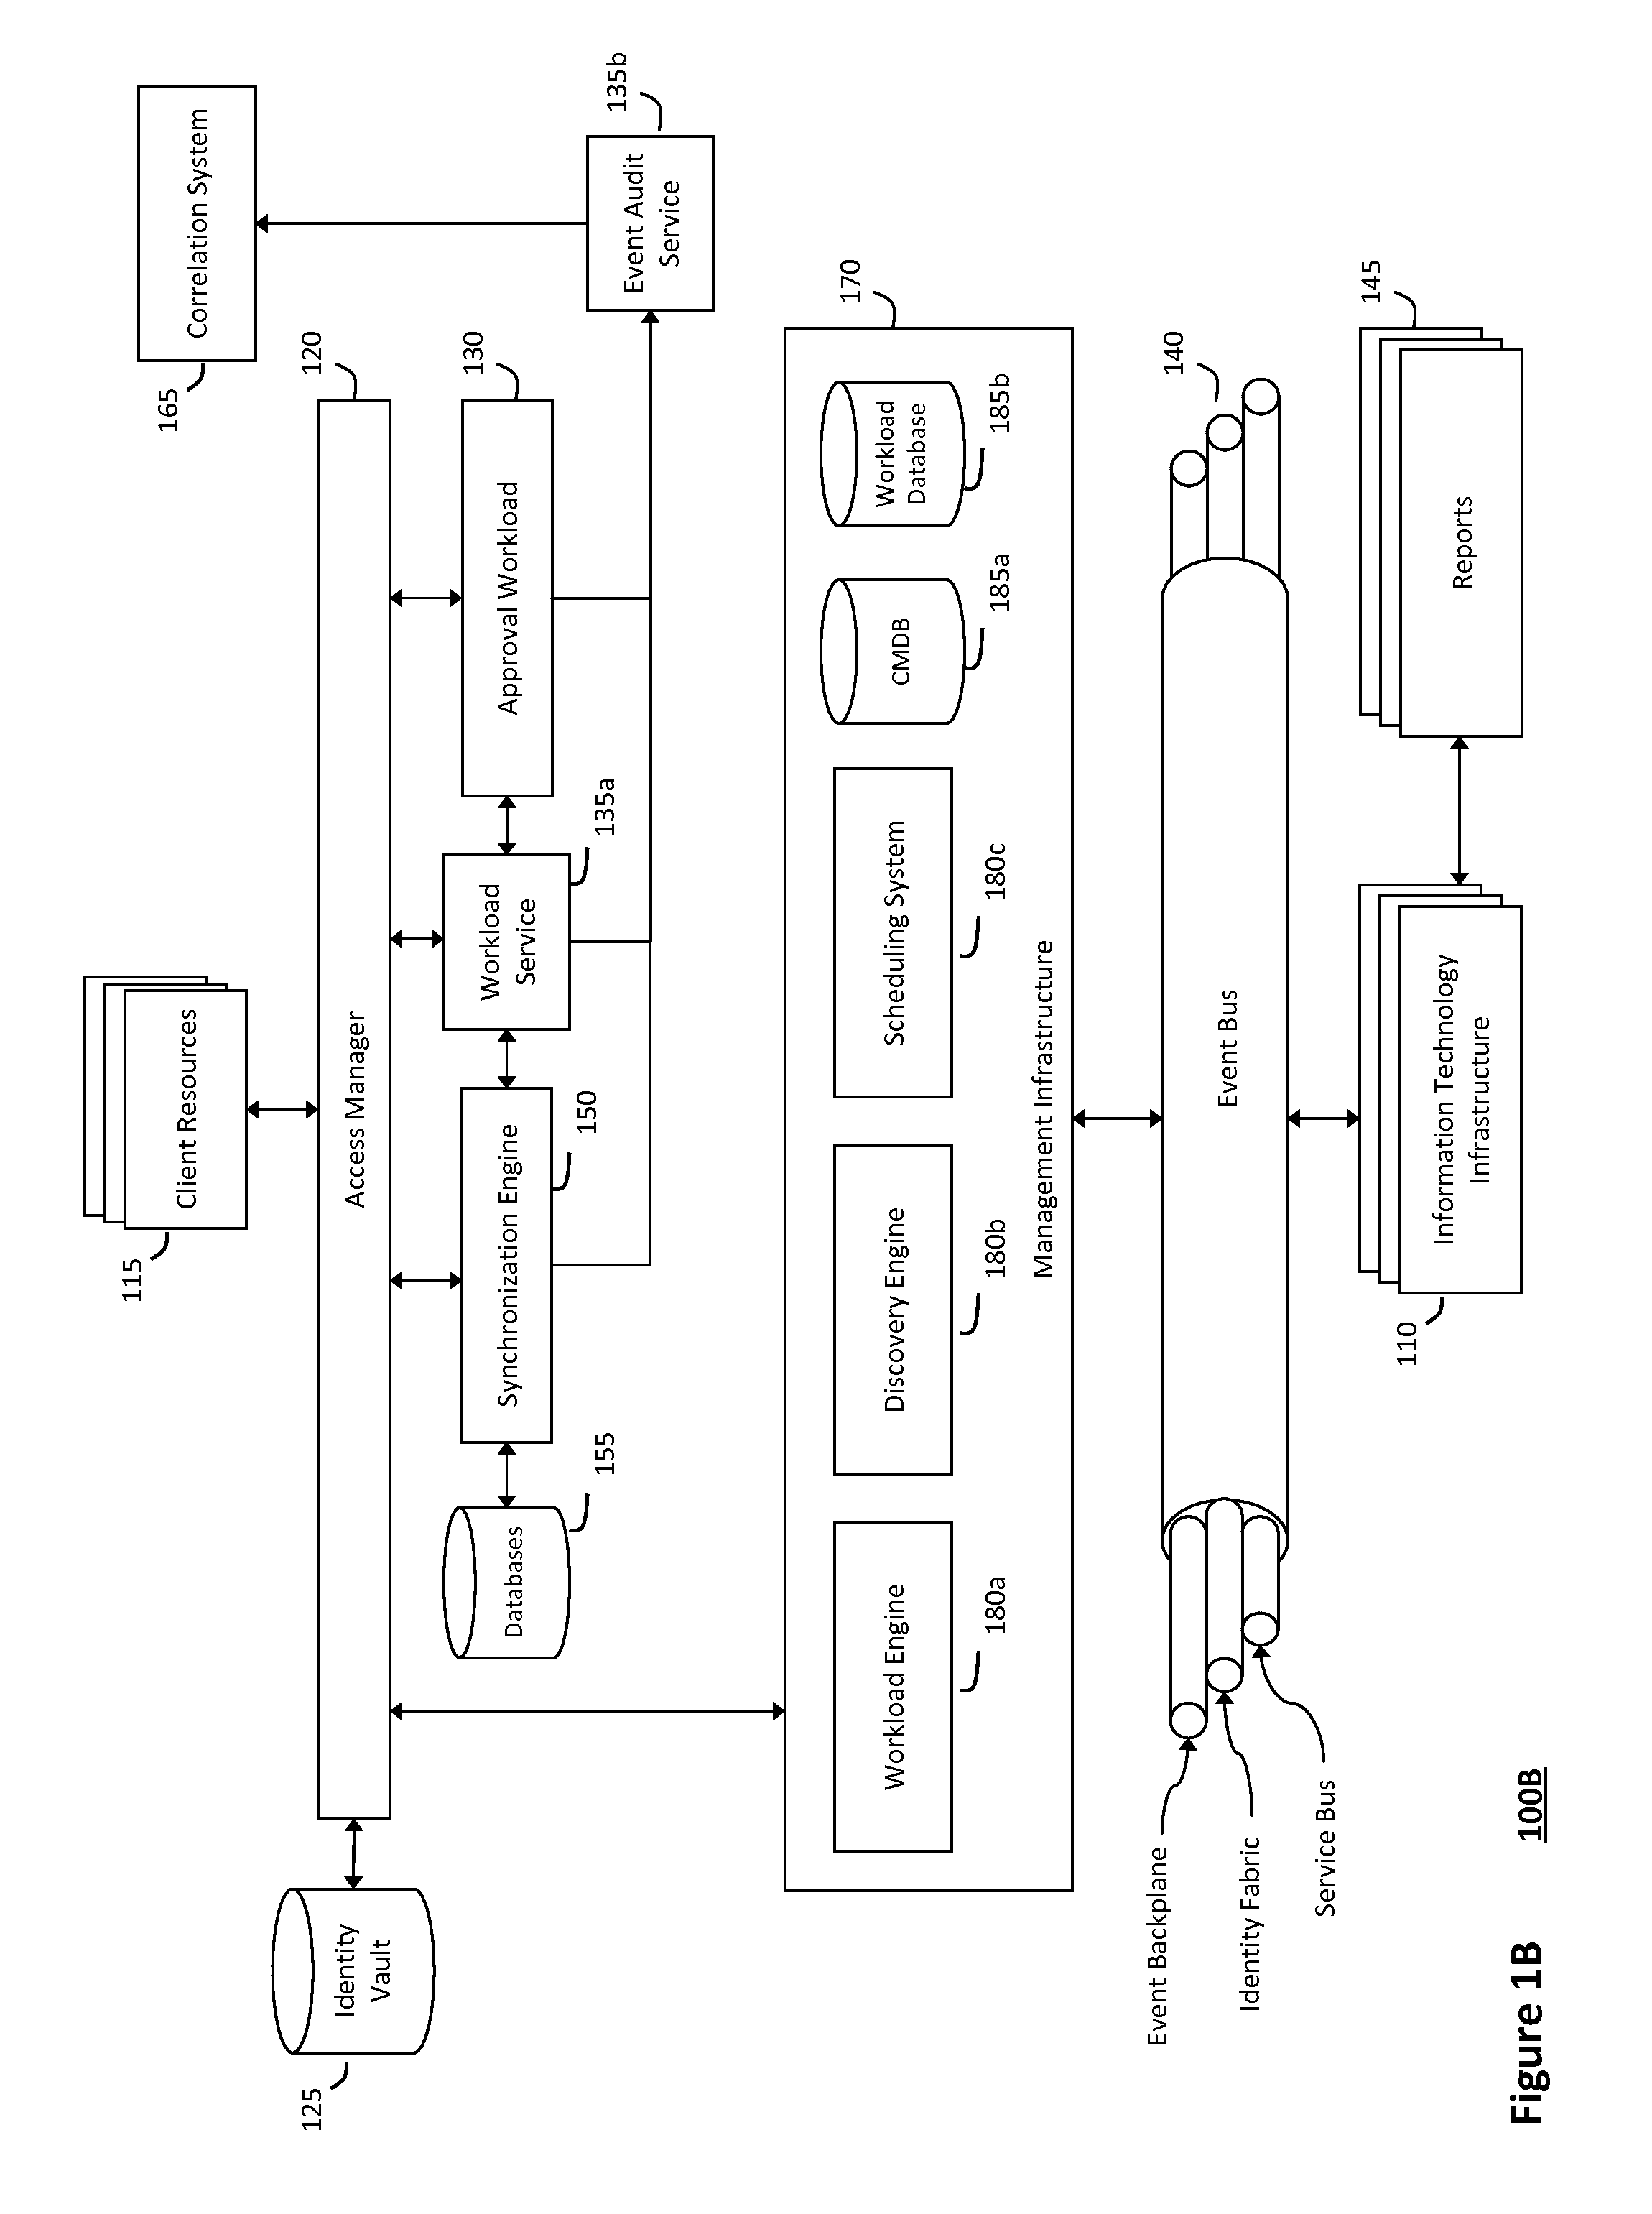 System and method for providing load balancer visibility in an intelligent workload management system